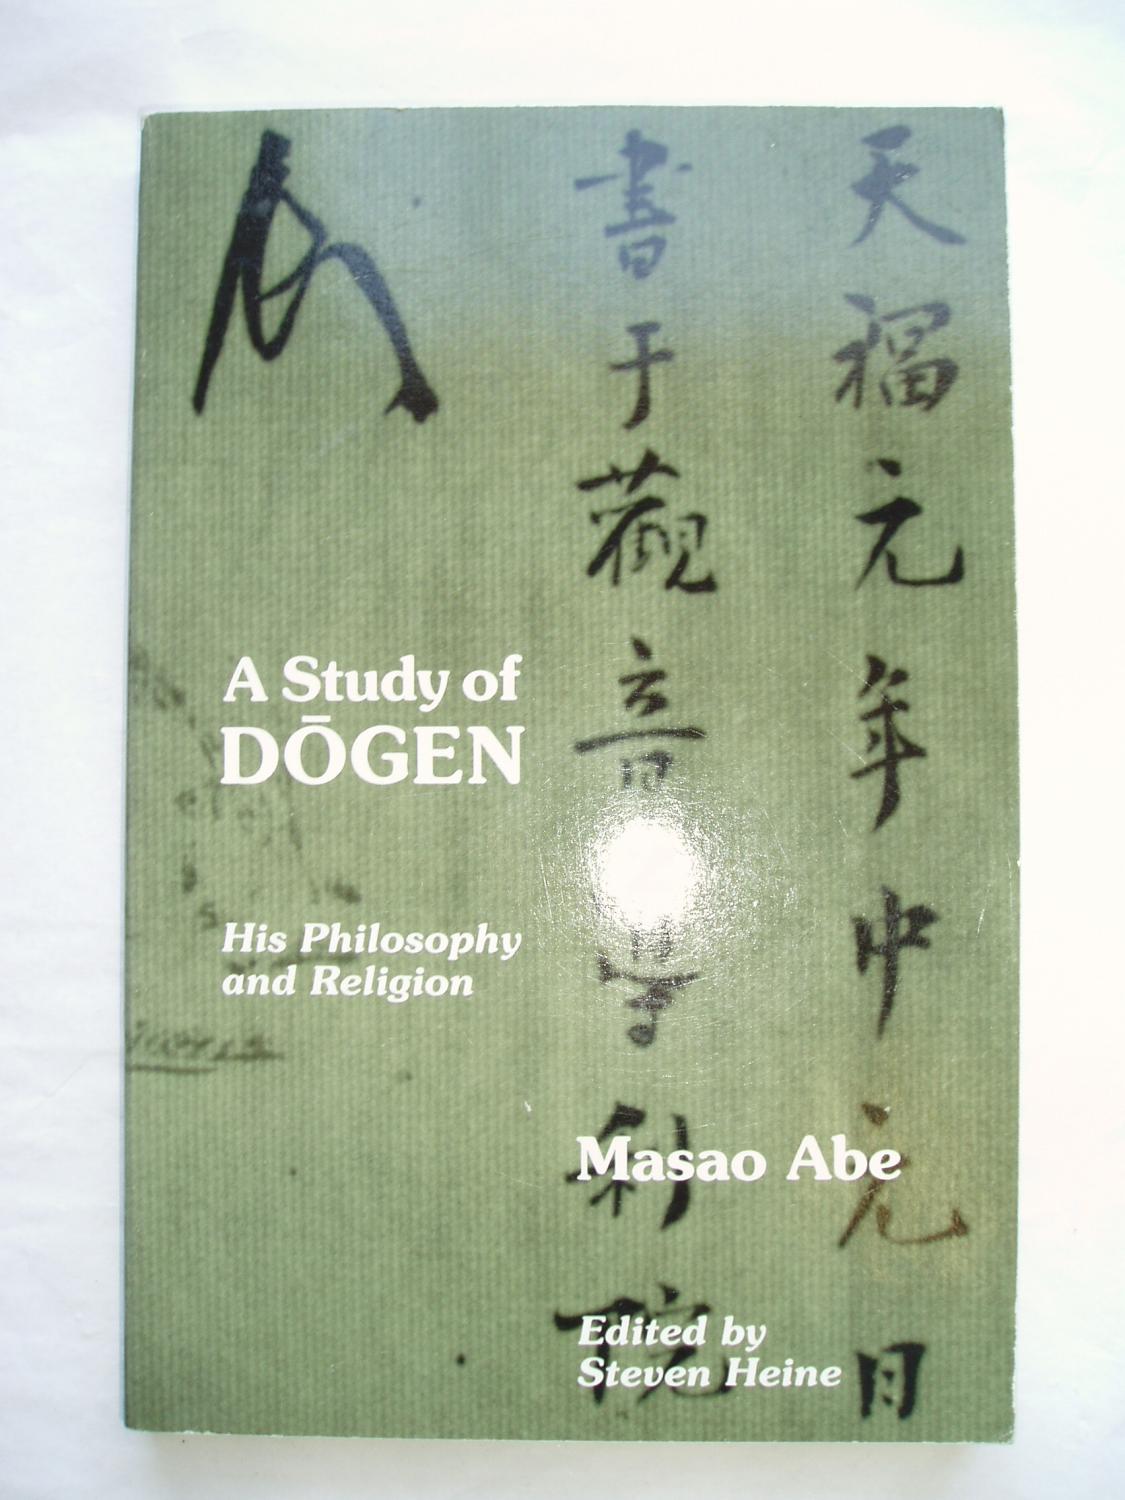 A STUDY OF DOGEN: His Philosophy and Religion